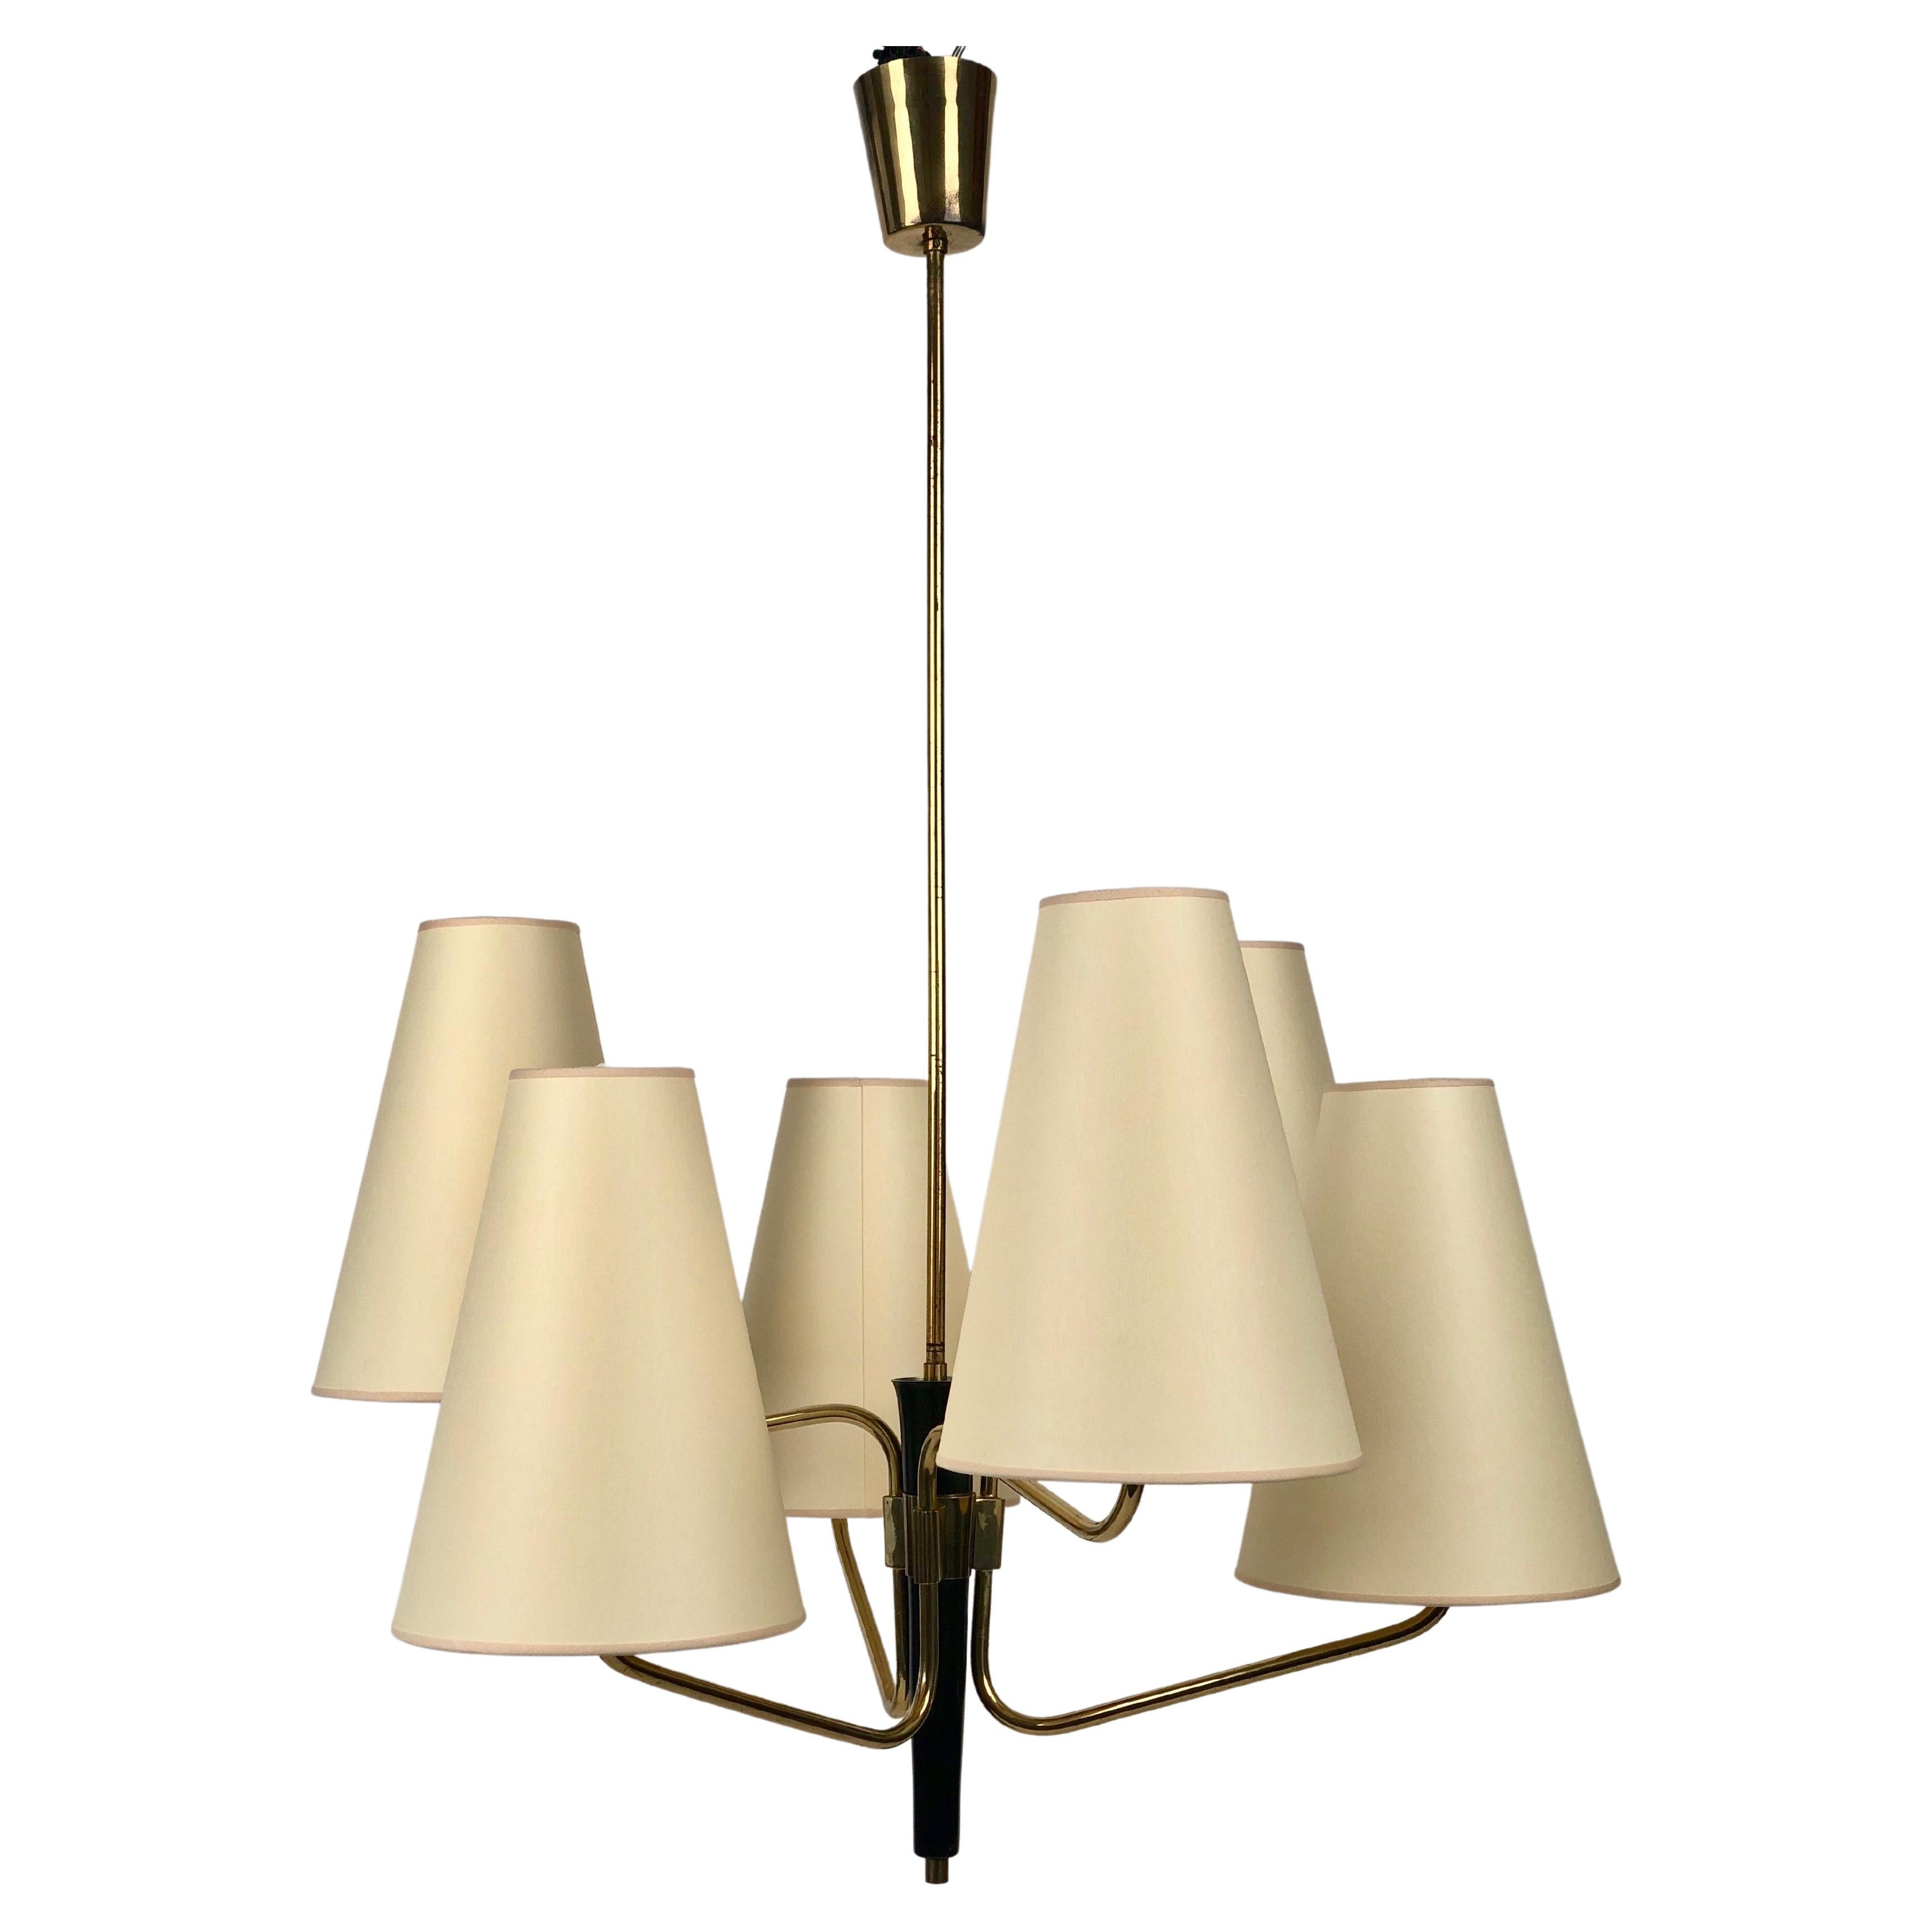 Midcentury Pendant Lamp in Brass from Rupert Nikoll, Austria with 6 Silk Shades